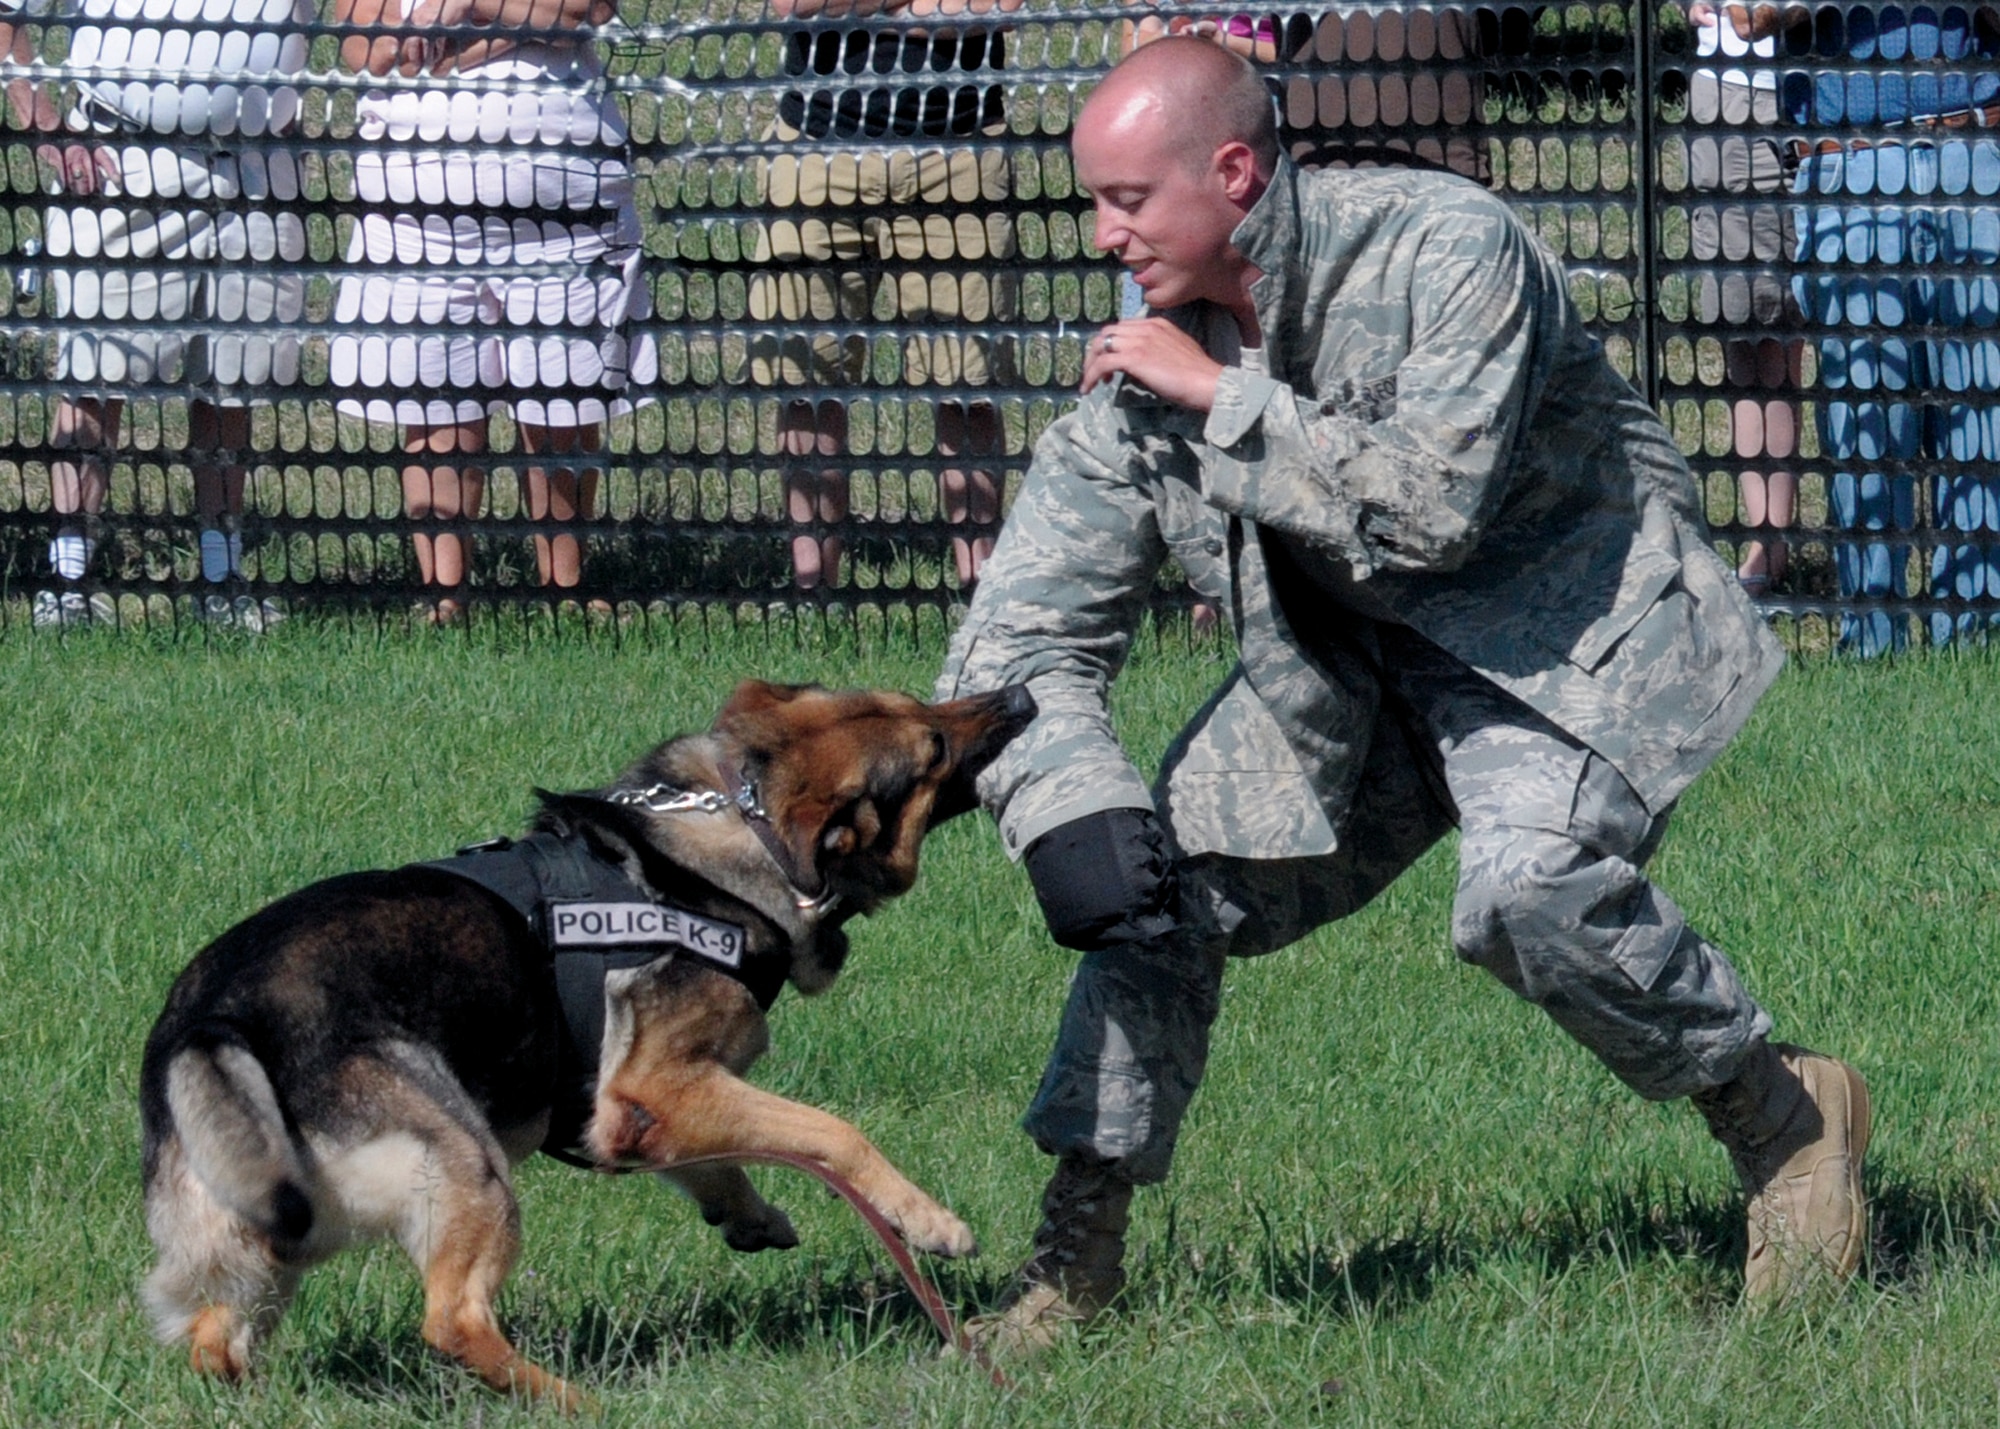 Bady, 90th Security Forces Squadron working dog, demonstrates attack maneuvers against attacker Staff Sgt. Nicholas White, 90th SFS, during a demonstration here. (U.S. Air Force photo by Blaze Lipowski)